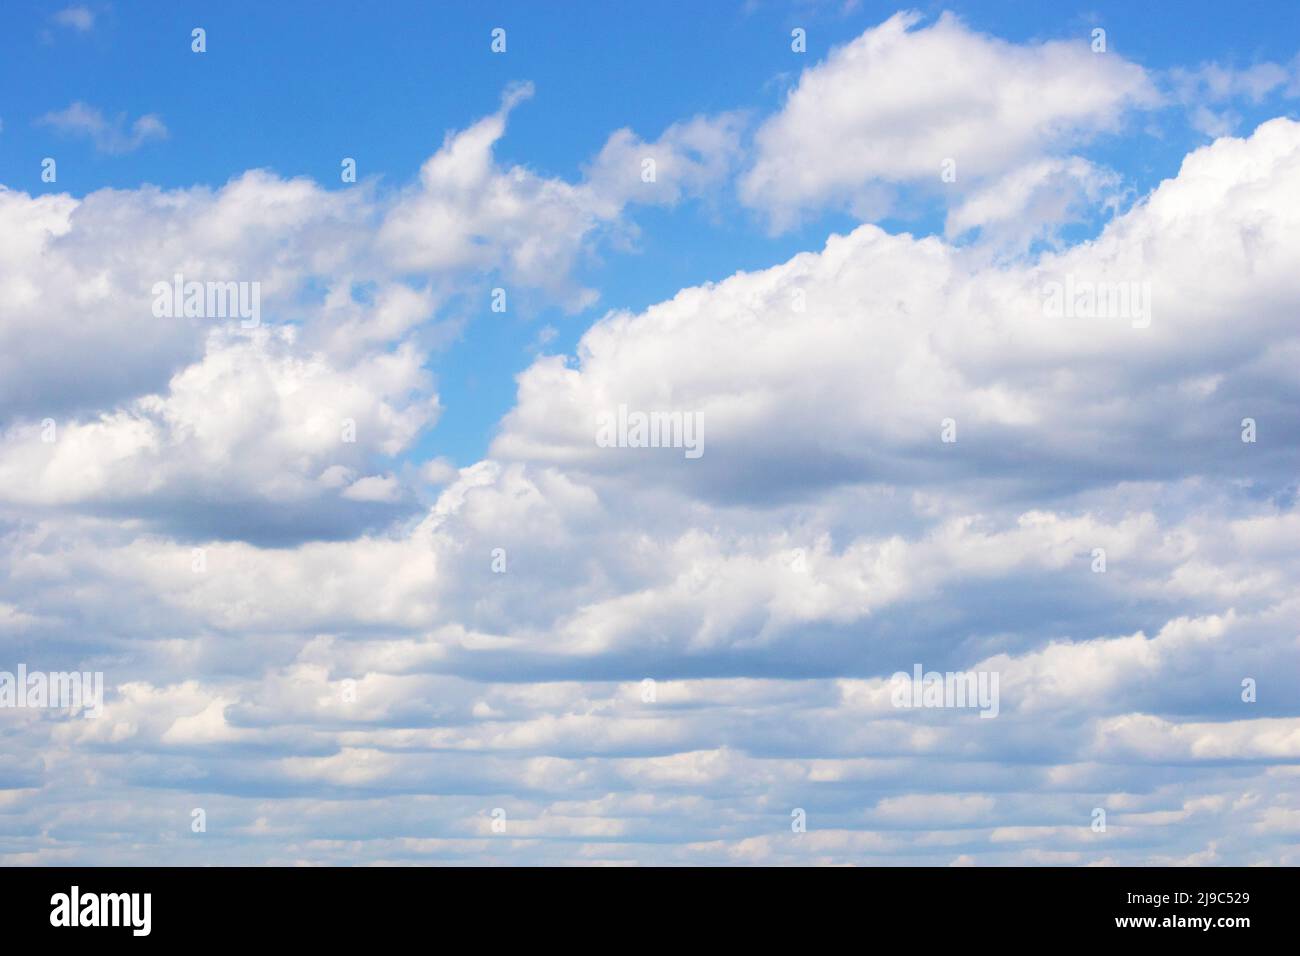 Image natural phenomenon blue sky with white clouds Stock Photo